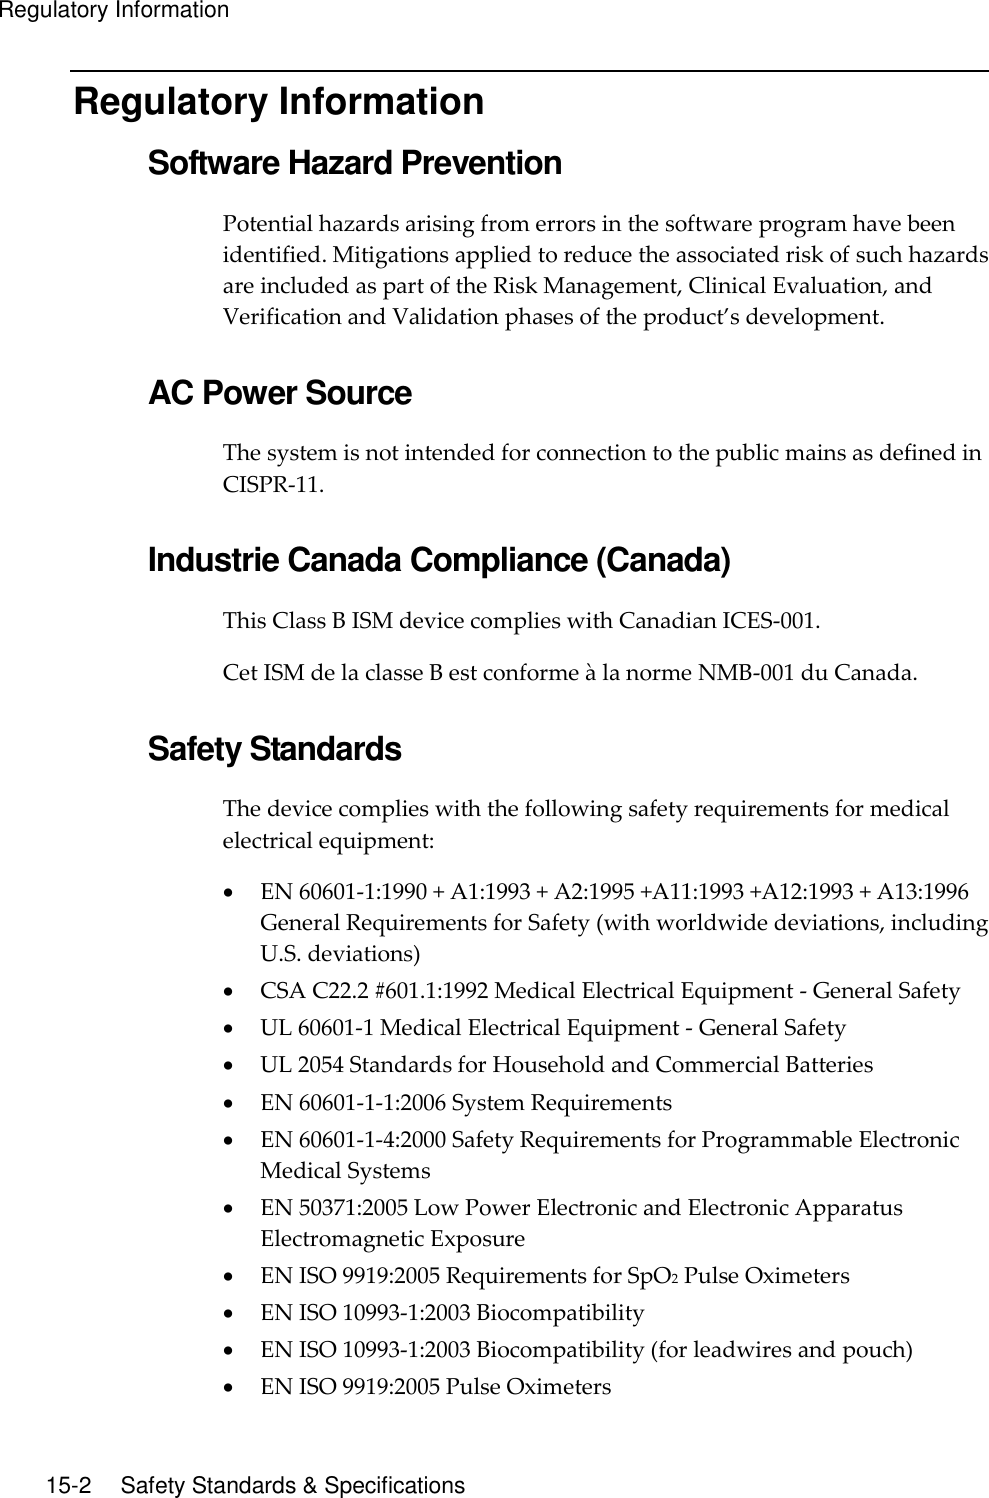 Regulatory Information  15-2    Safety Standards &amp; Specifications Regulatory Information Software Hazard Prevention Potential hazards arising from errors in the software program have been identified. Mitigations applied to reduce the associated risk of such hazards are included as part of the Risk Management, Clinical Evaluation, and Verification and Validation phases of the product’s development.  AC Power Source The system is not intended for connection to the public mains as defined in CISPR-11.  Industrie Canada Compliance (Canada) This Class B ISM device complies with Canadian ICES-001. Cet ISM de la classe B est conforme à la norme NMB-001 du Canada.  Safety Standards The device complies with the following safety requirements for medical electrical equipment:  EN 60601-1:1990 + A1:1993 + A2:1995 +A11:1993 +A12:1993 + A13:1996 General Requirements for Safety (with worldwide deviations, including U.S. deviations)  CSA C22.2 #601.1:1992 Medical Electrical Equipment - General Safety  UL 60601-1 Medical Electrical Equipment - General Safety  UL 2054 Standards for Household and Commercial Batteries  EN 60601-1-1:2006 System Requirements  EN 60601-1-4:2000 Safety Requirements for Programmable Electronic Medical Systems  EN 50371:2005 Low Power Electronic and Electronic Apparatus Electromagnetic Exposure  EN ISO 9919:2005 Requirements for SpO2 Pulse Oximeters  EN ISO 10993-1:2003 Biocompatibility  EN ISO 10993-1:2003 Biocompatibility (for leadwires and pouch)  EN ISO 9919:2005 Pulse Oximeters 